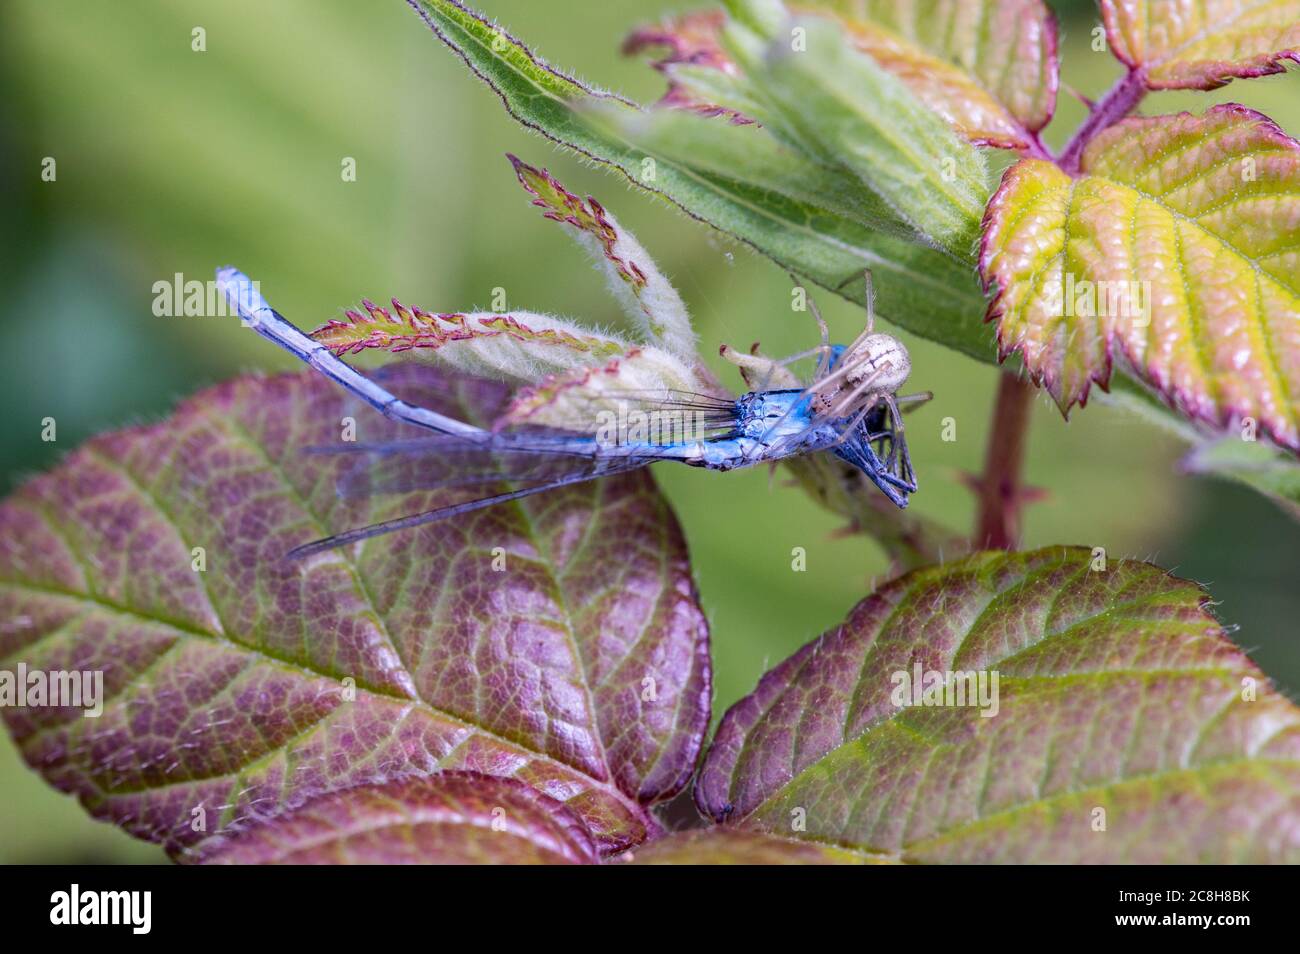 Common Candy-striped spider with azure damselfly prey. Stock Photo